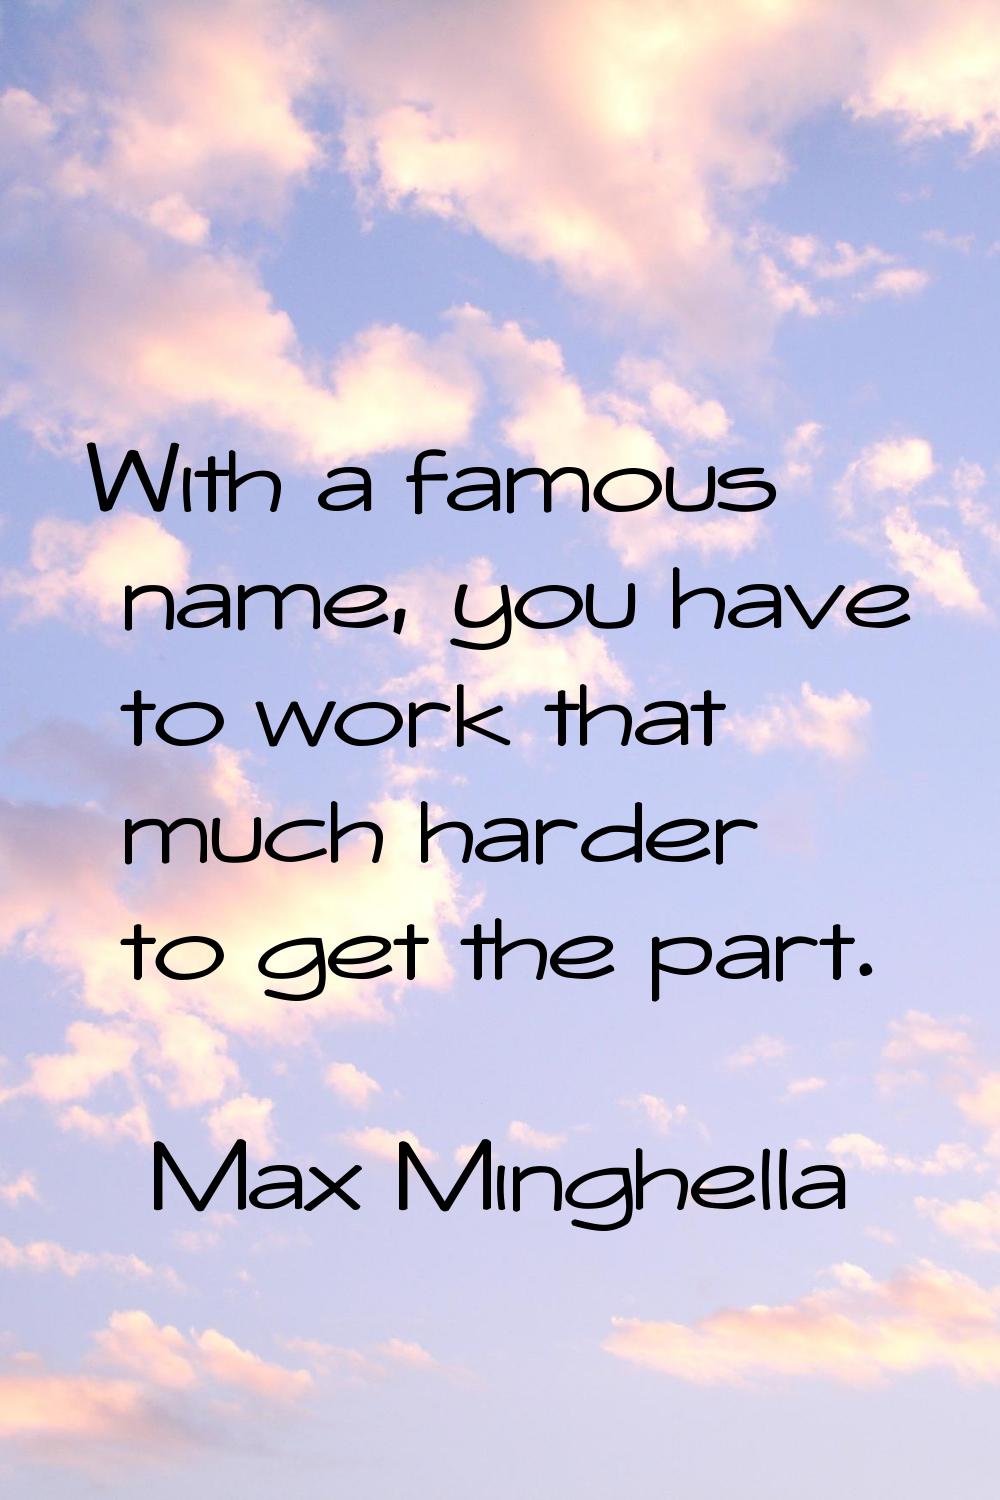 With a famous name, you have to work that much harder to get the part.